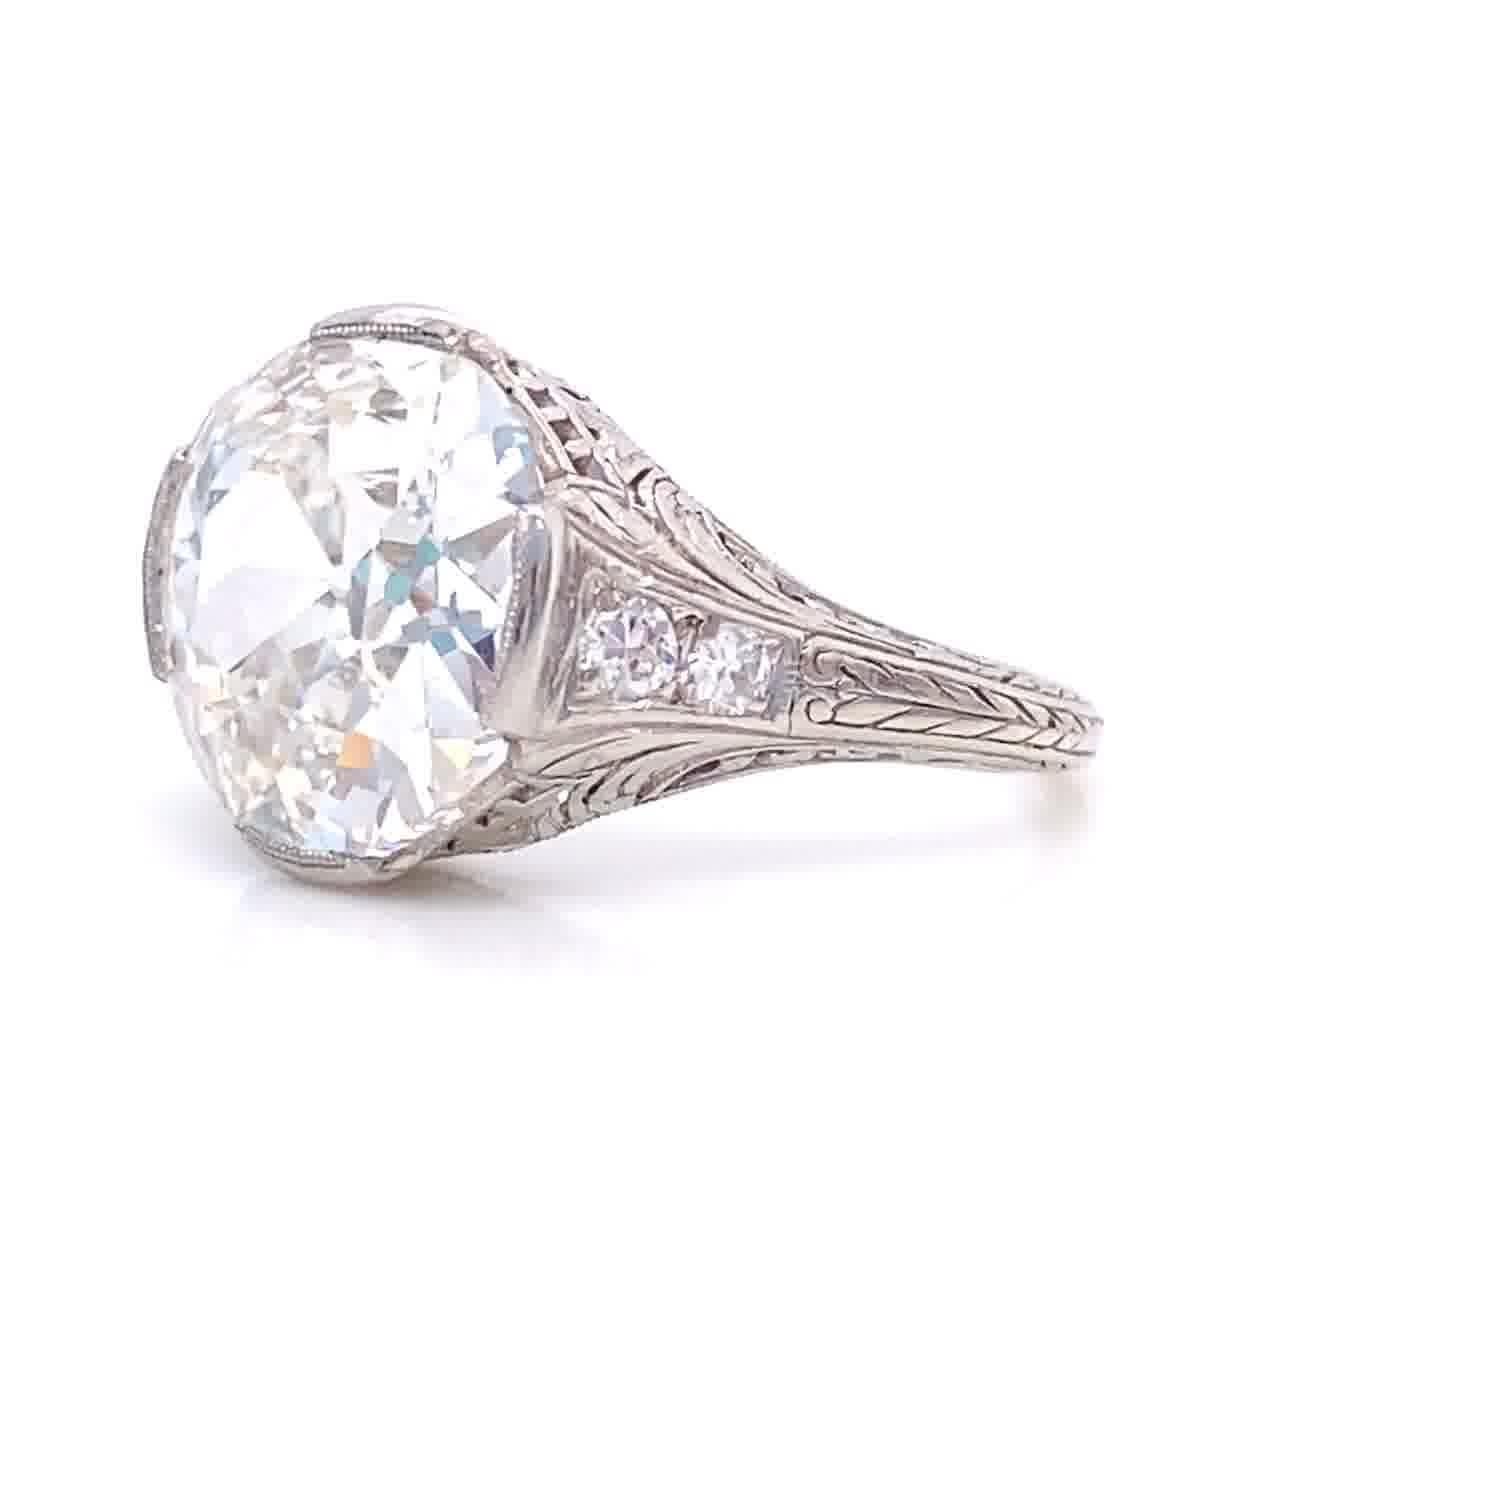 If you are looking for an 1920s diamond ring, featuring symmetry, fine detail, and a display of elegance you might consider this ring. This style was a trend in the 1920's and will still brighten your day when you see it on your finger. Diamond